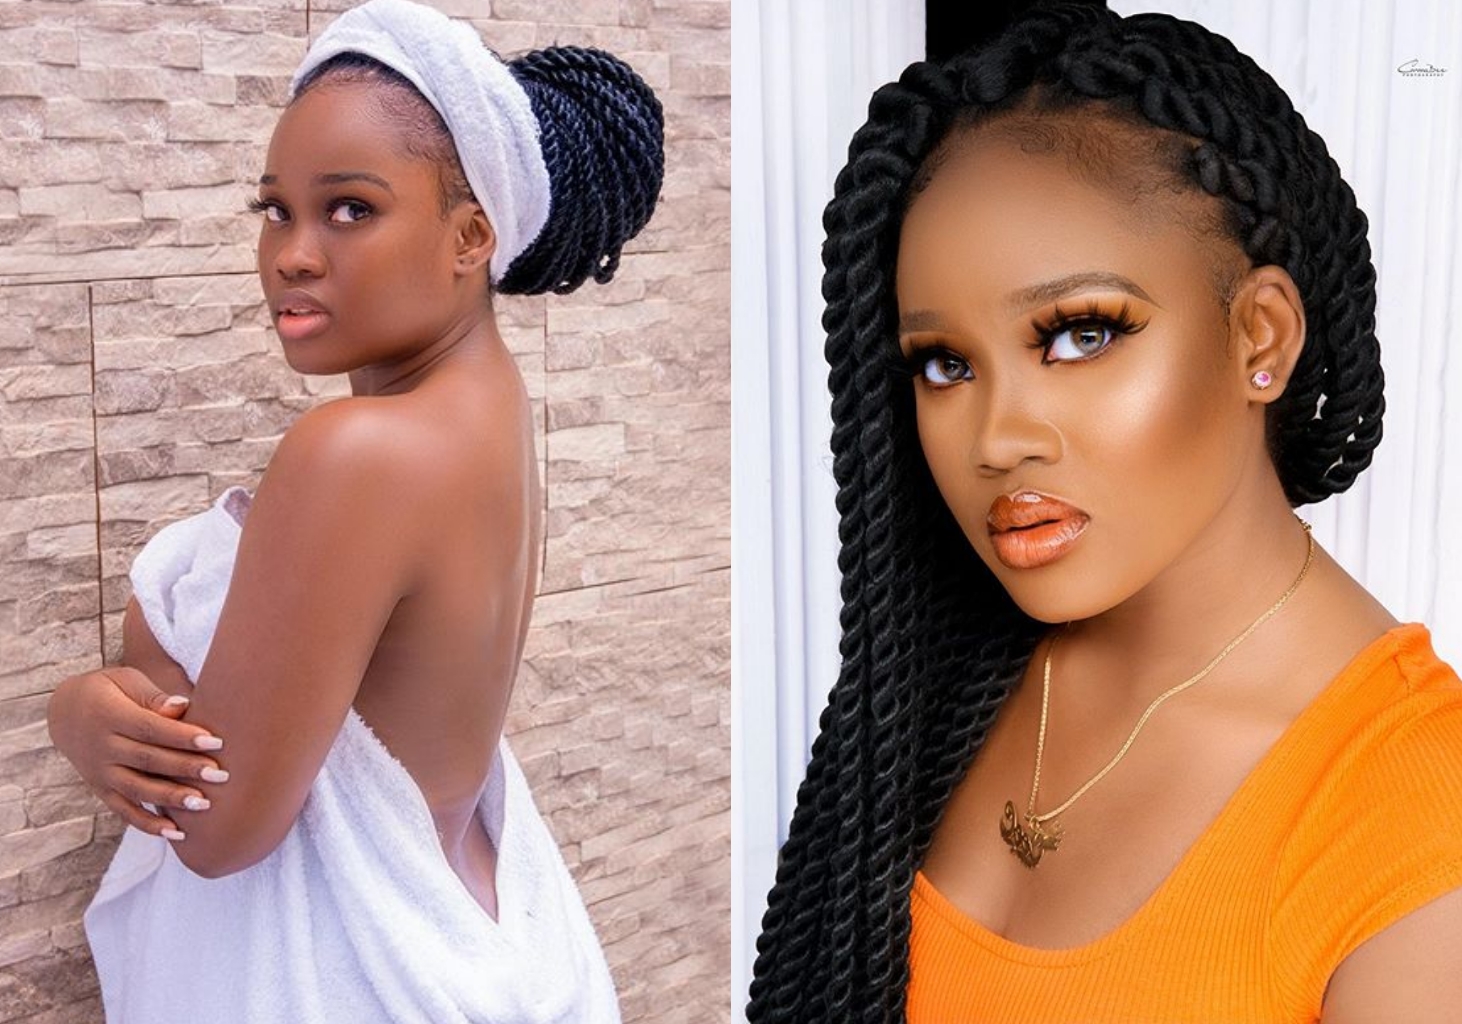 Cee-C tension IG as she goes topless in new photoshoots